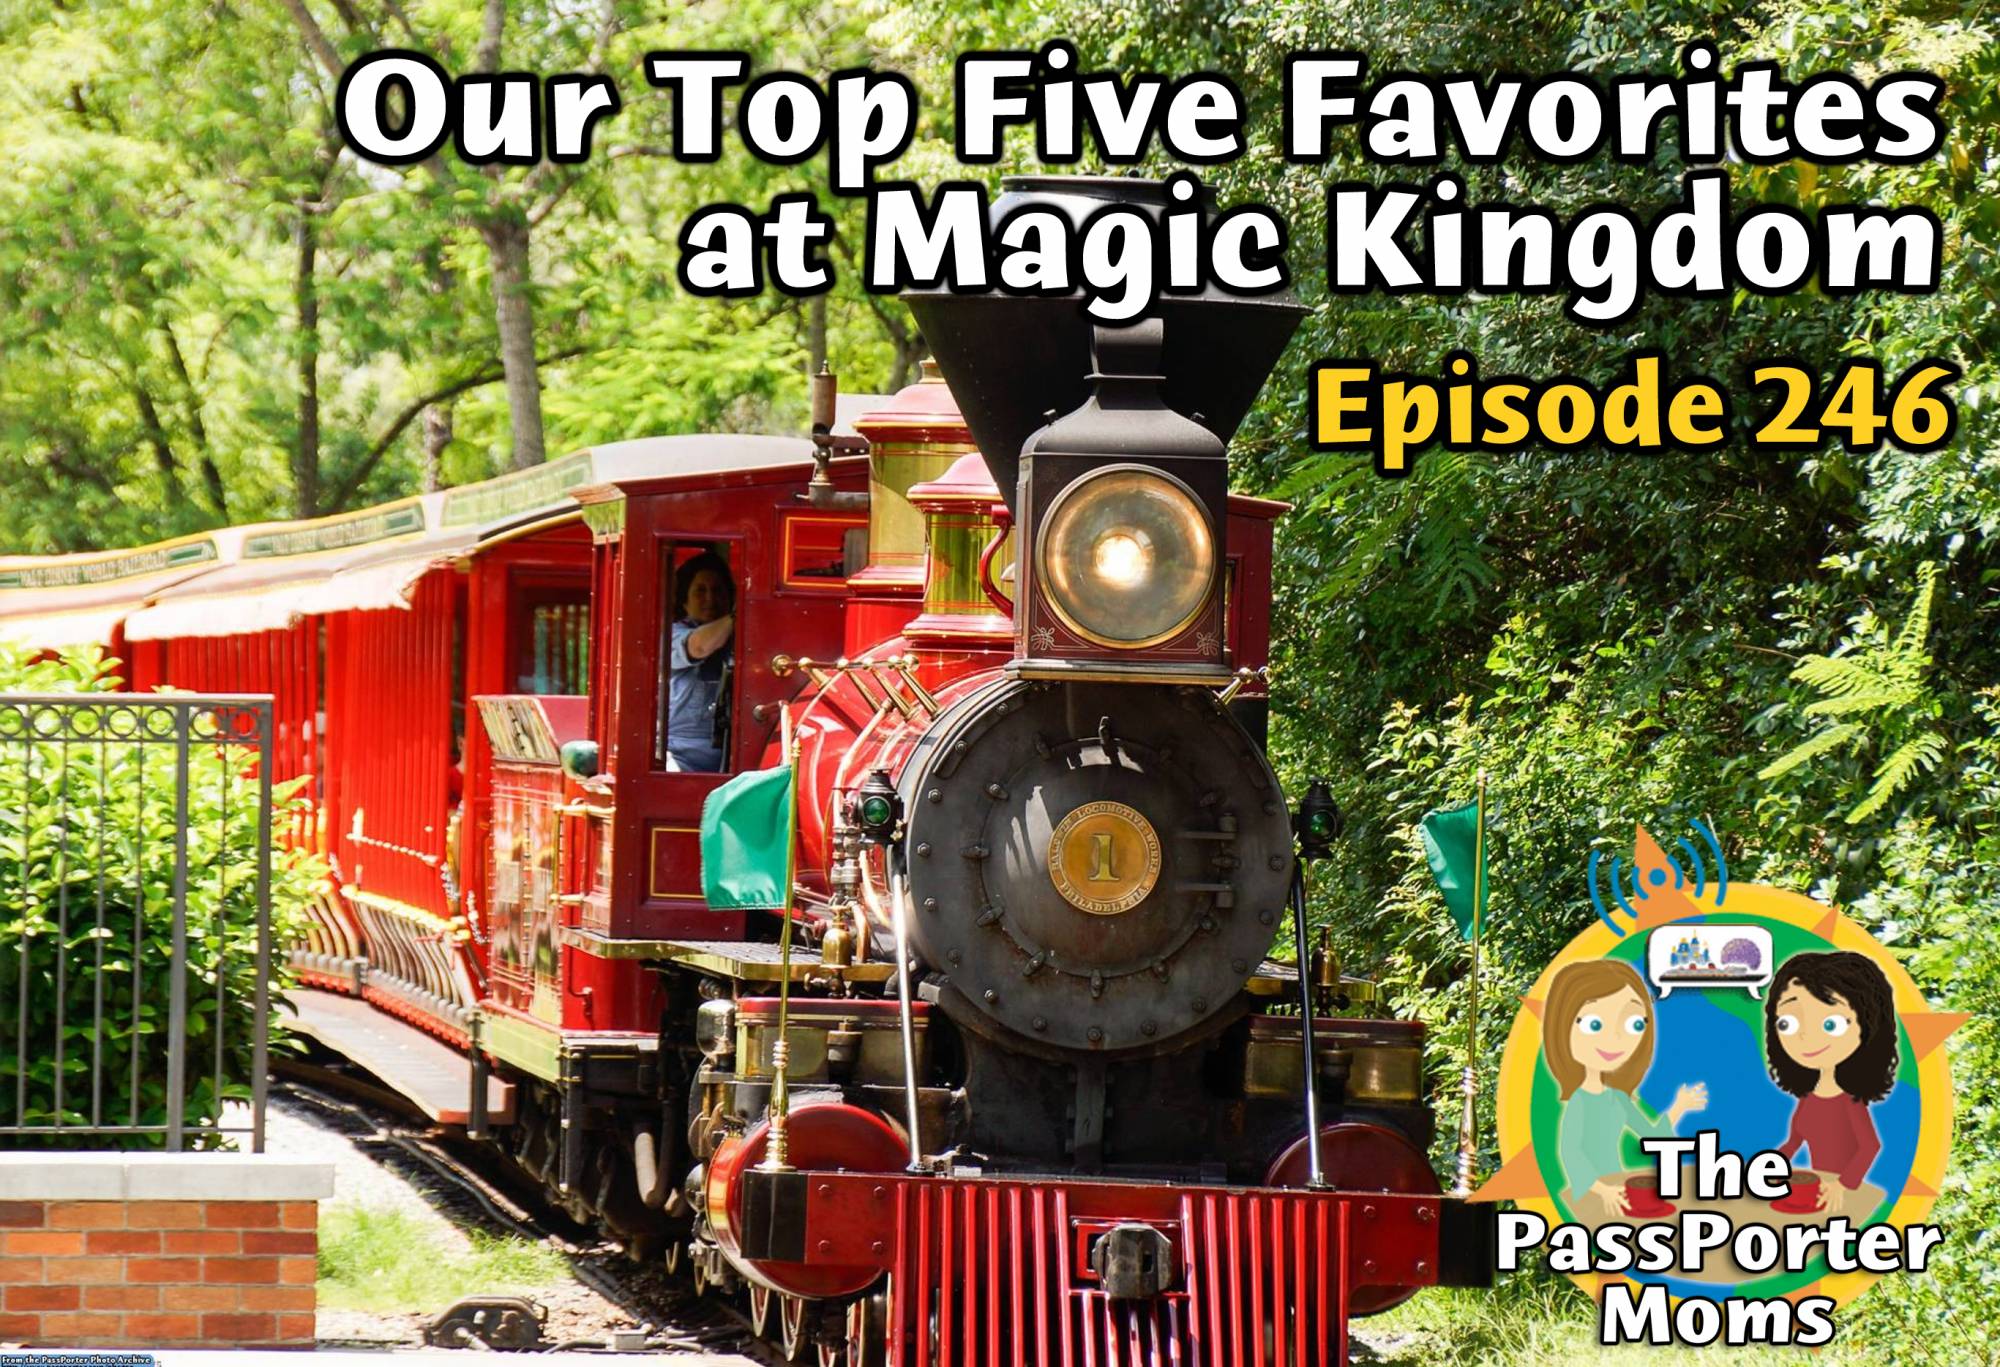 Our Top Five Favorite Things at Magic Kingdom